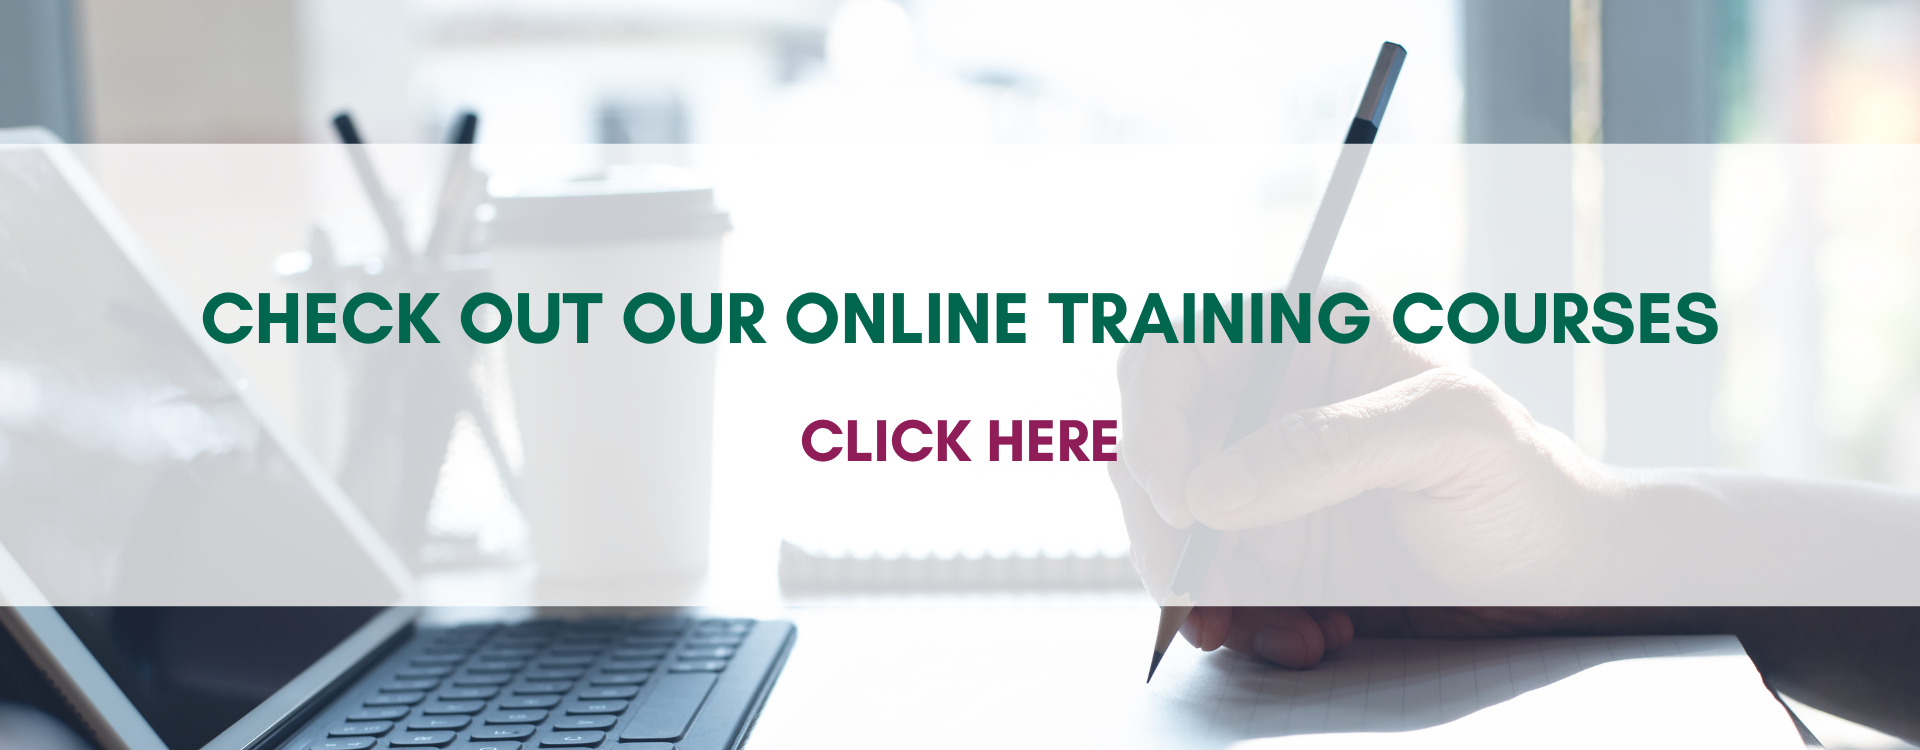 Online Training Courses Mobile